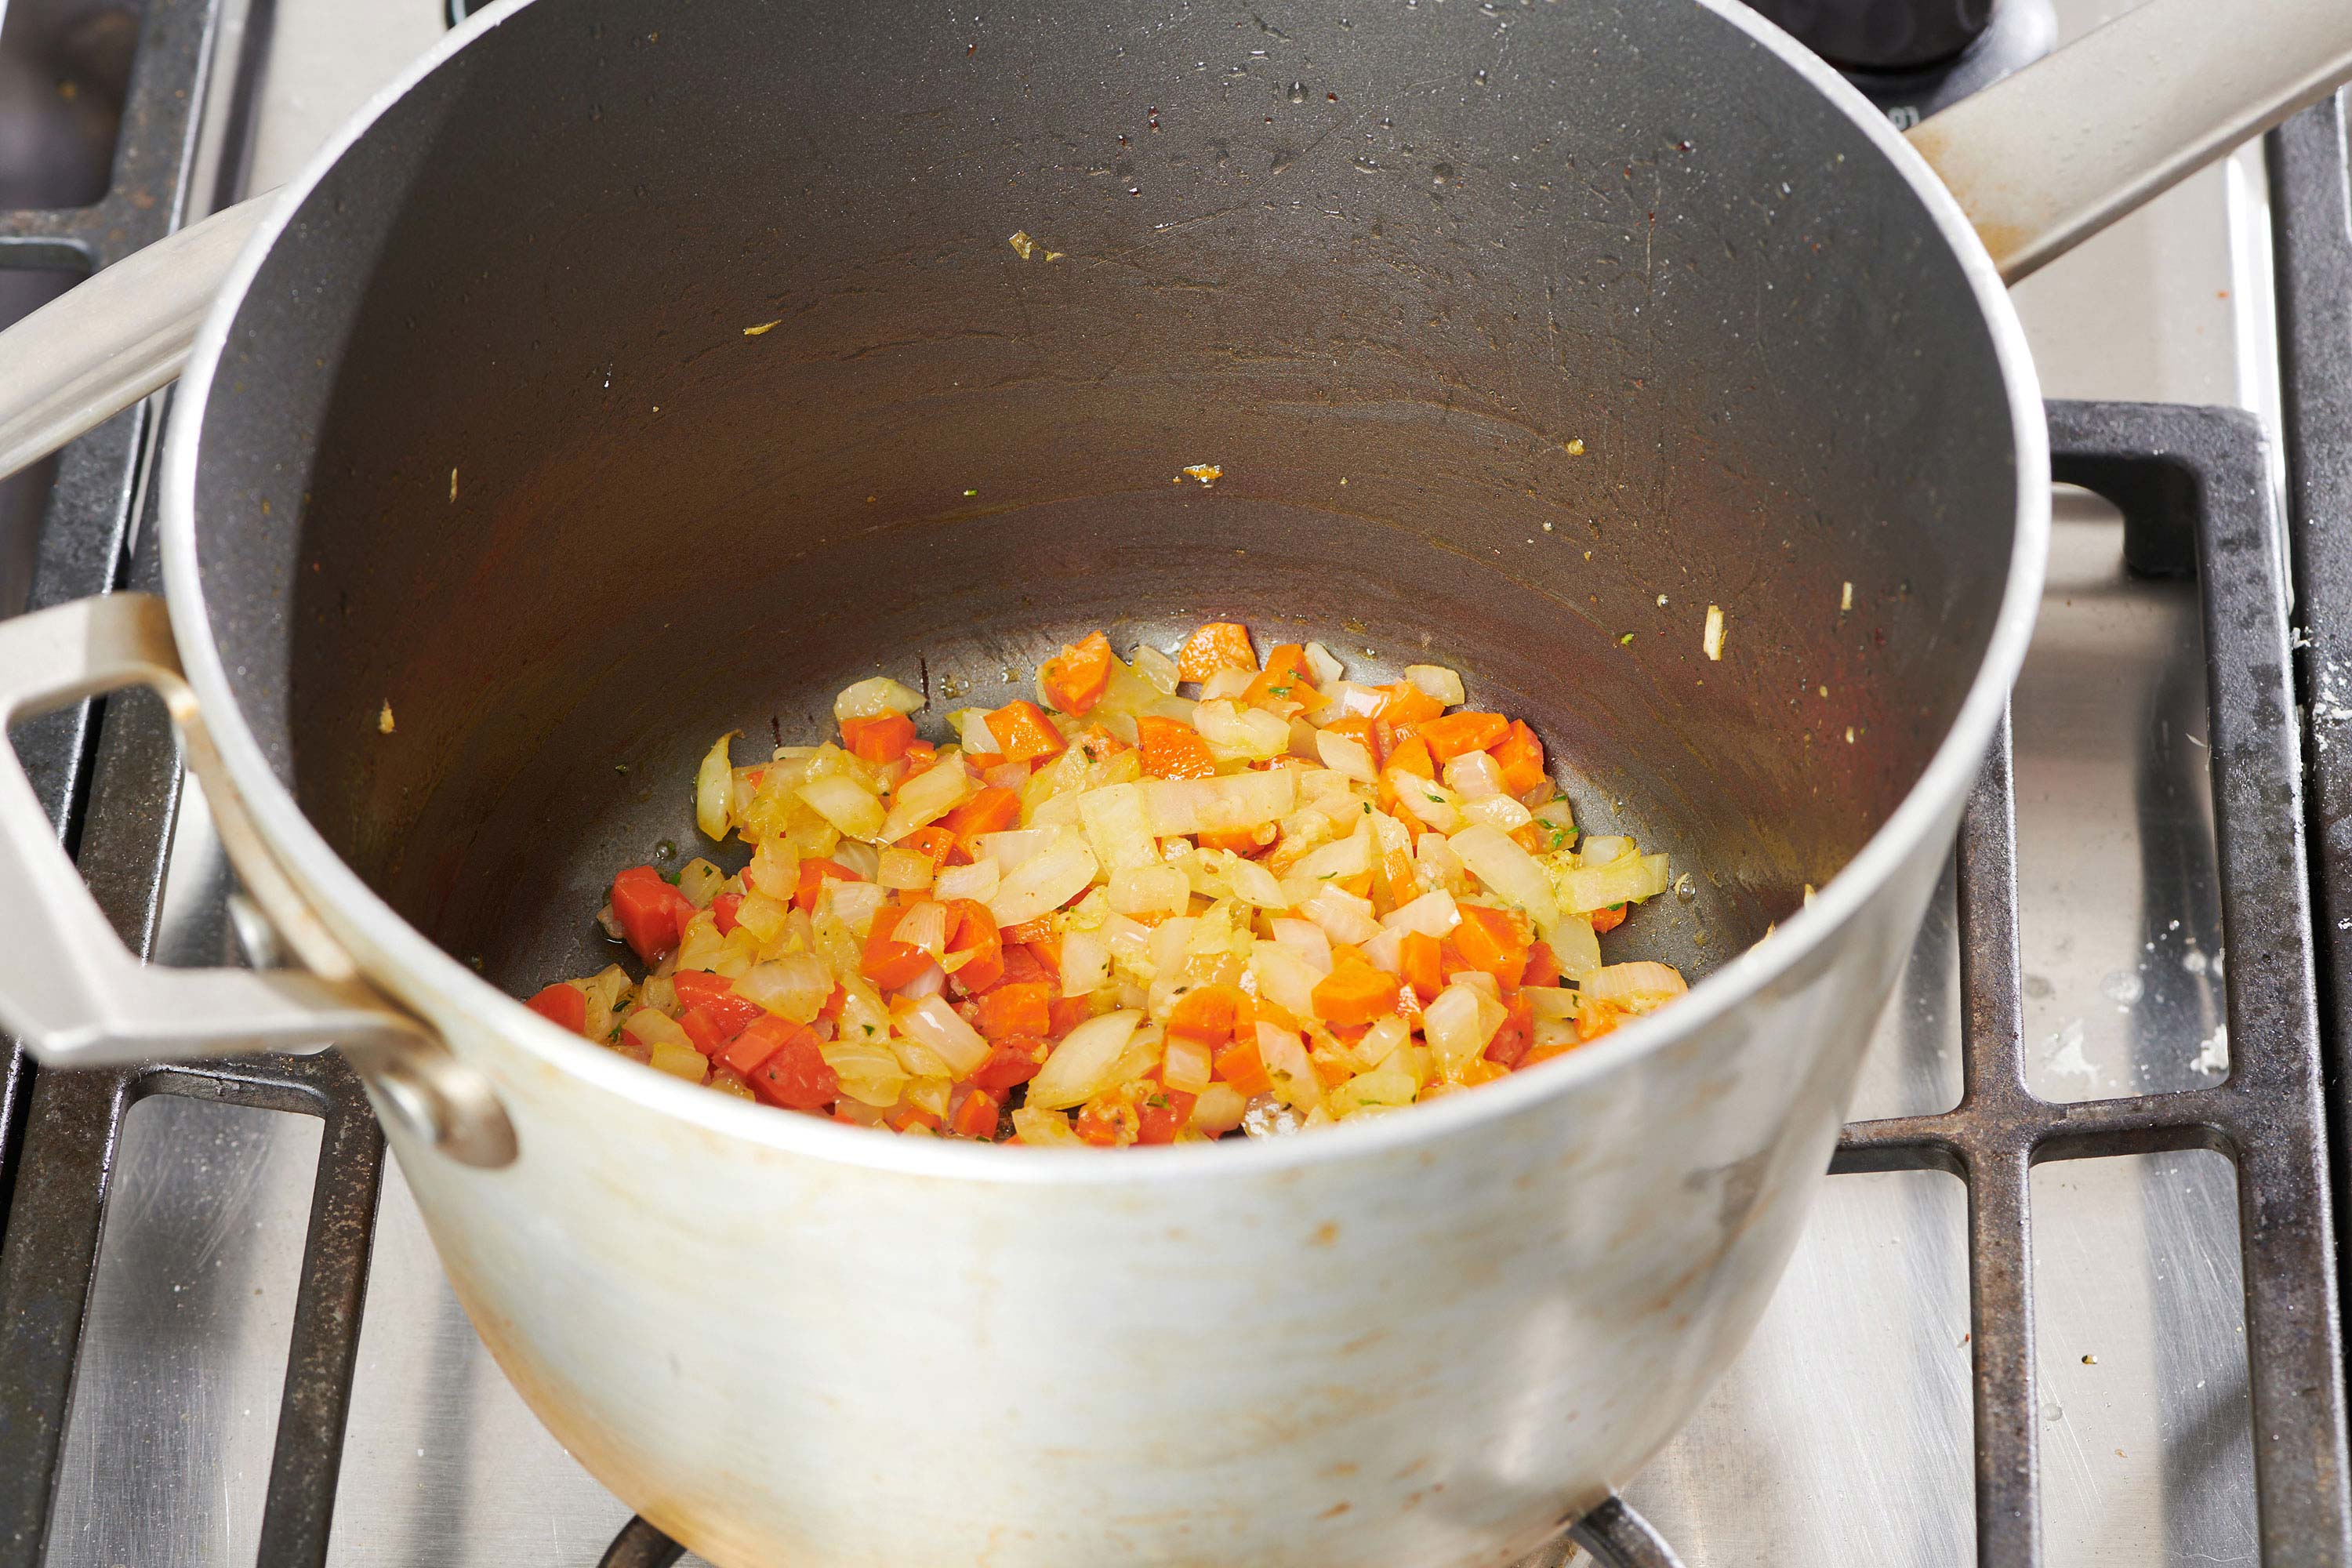 Onions and carrots in a large pot.